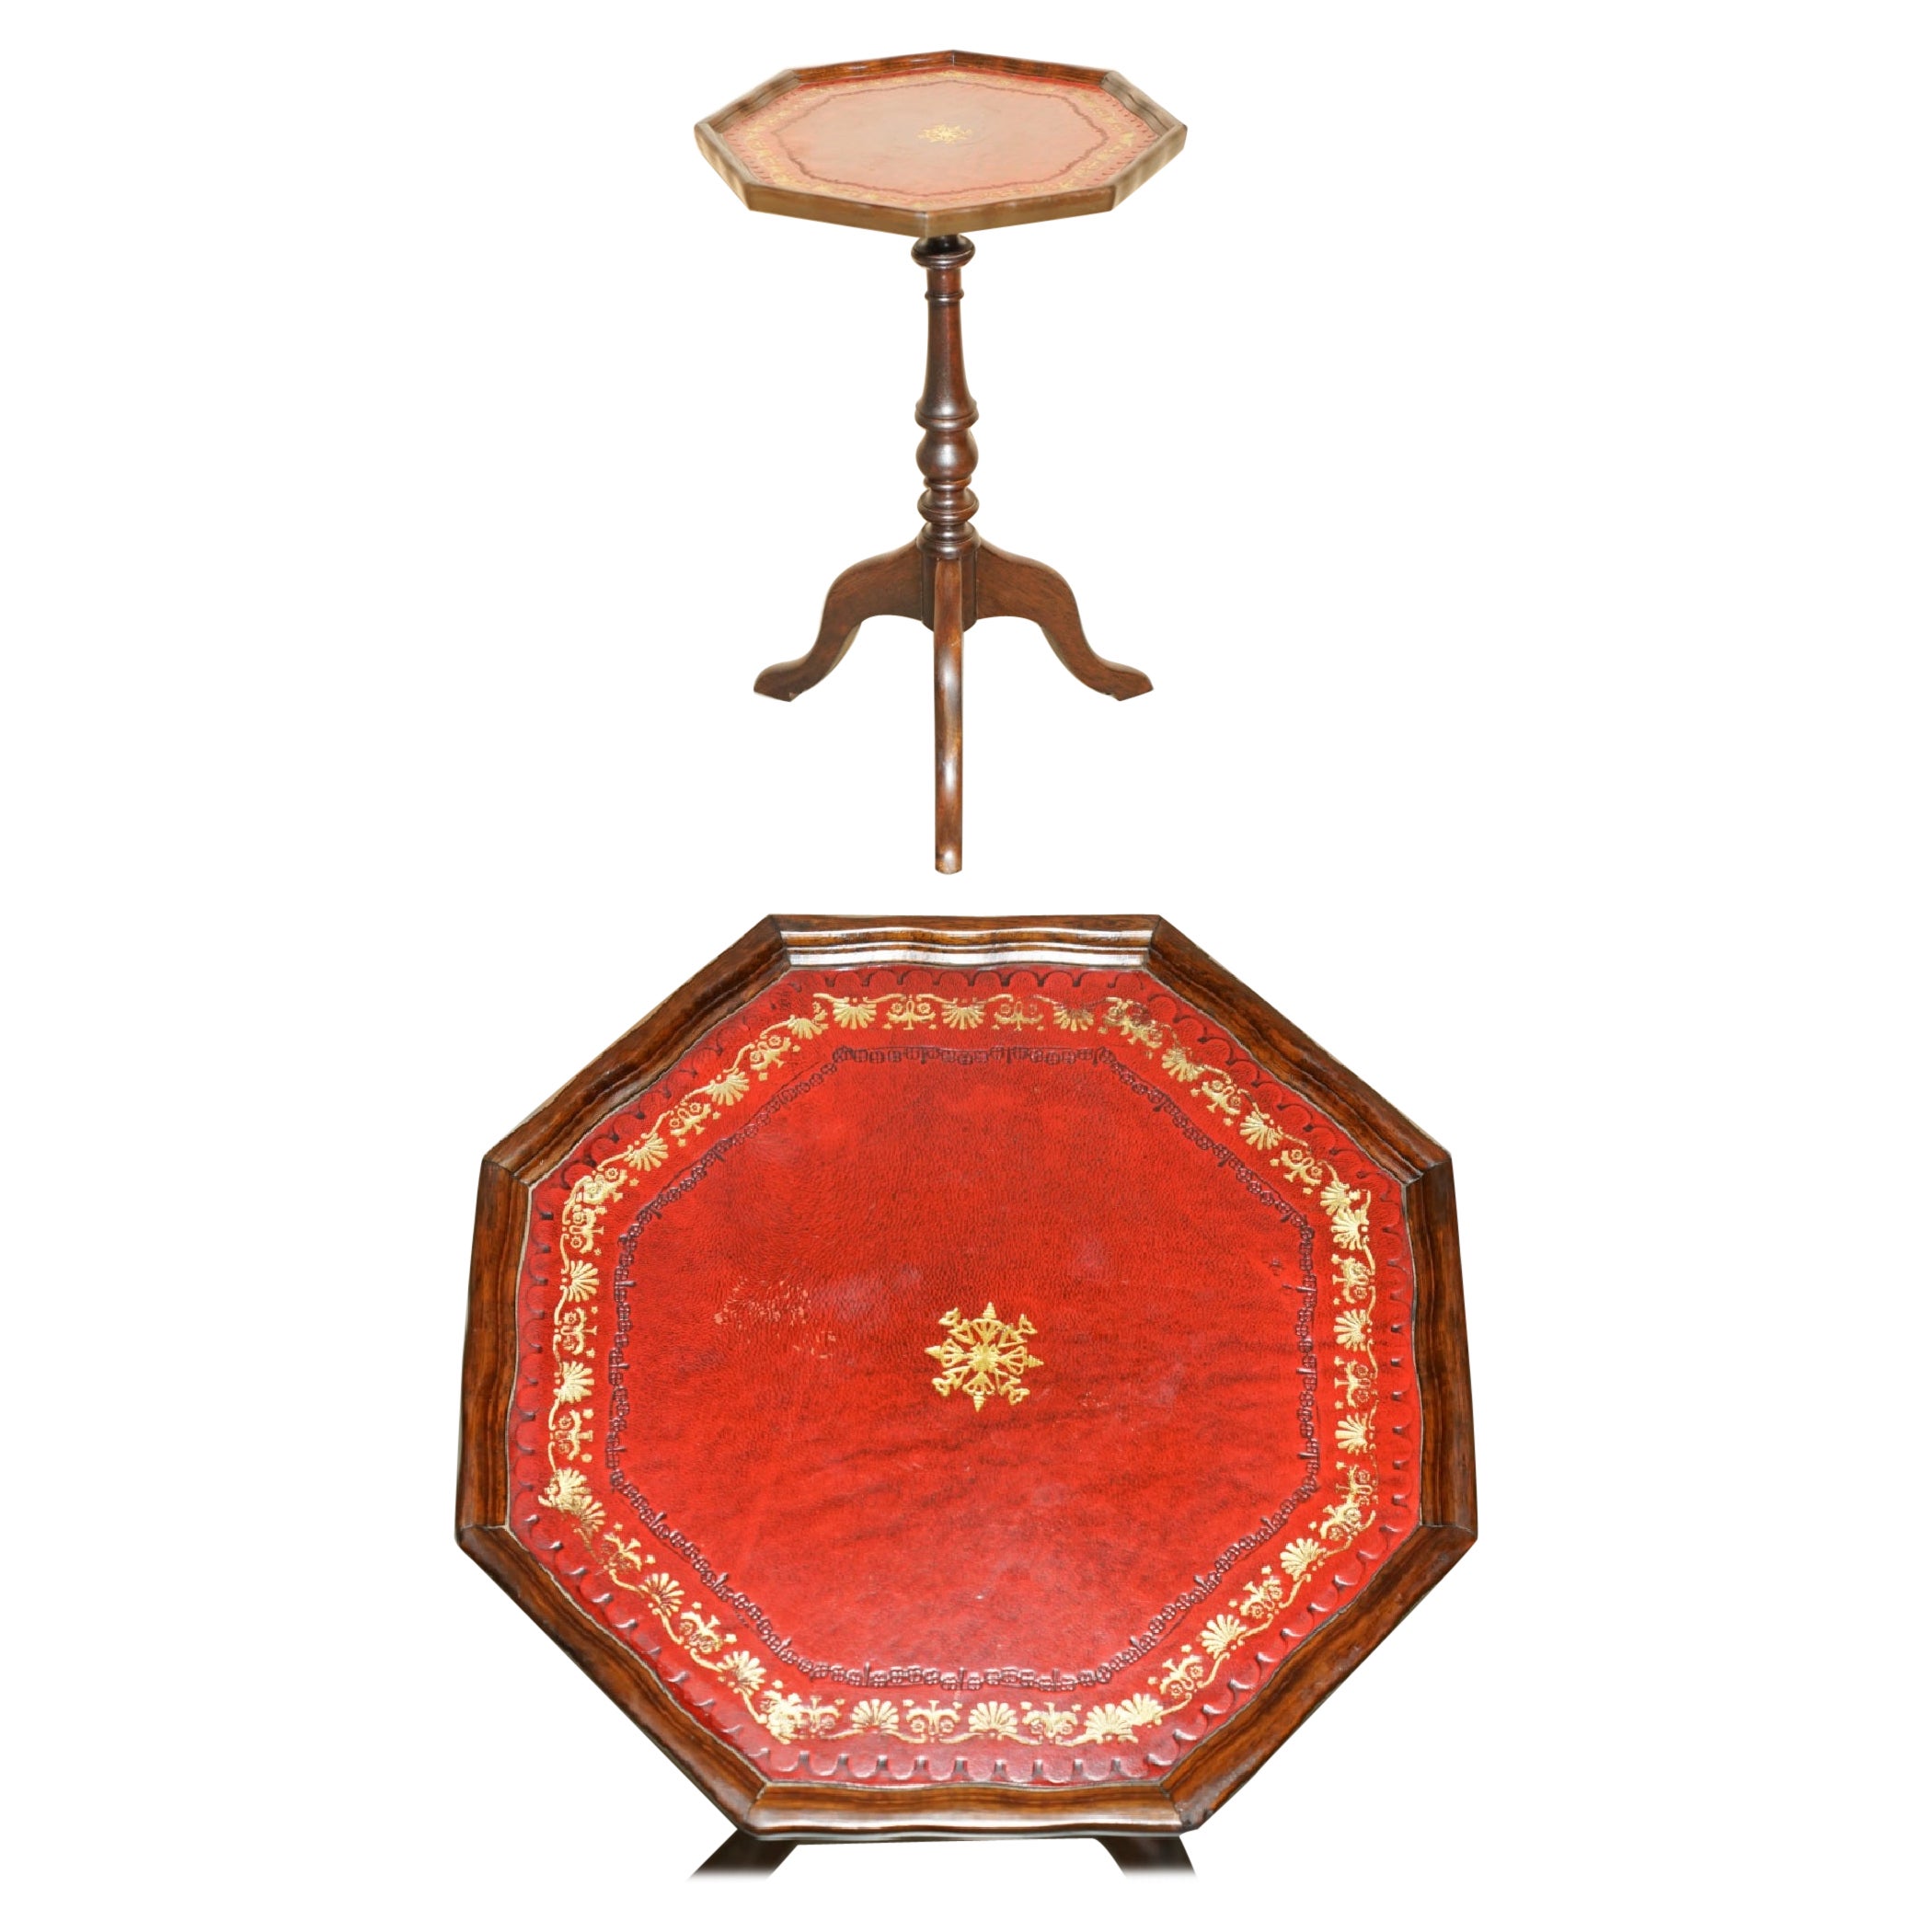 LOVELY GOLD LEAF EMBOSSED OXBLOOD LEATHER TRIPOD SiDE END LAMP WINE TABLE For Sale